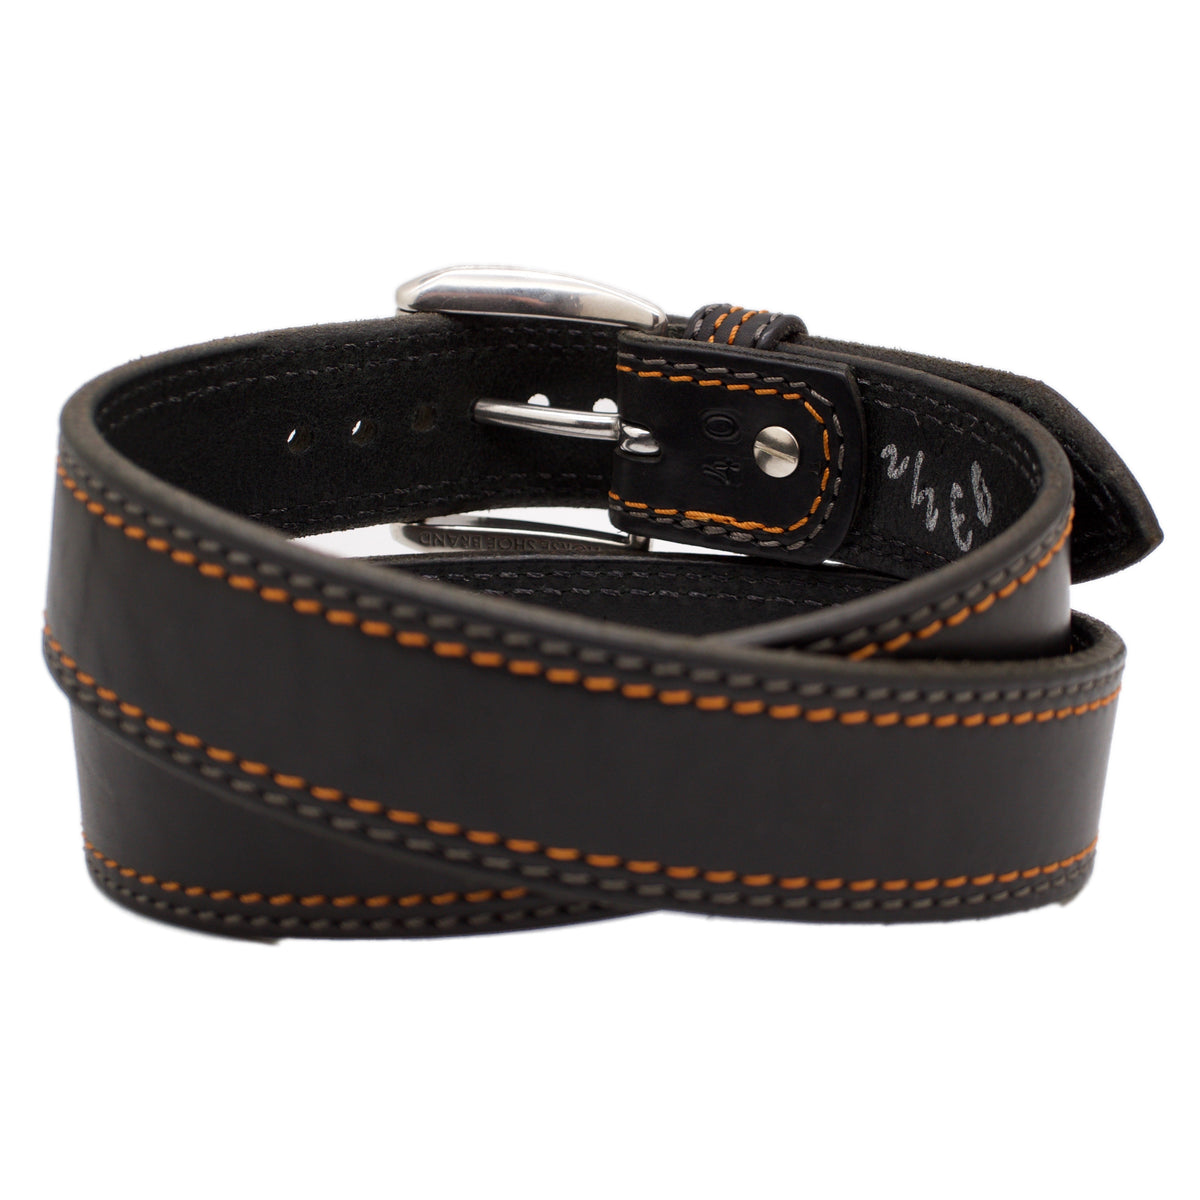 The STURGIS Wide 1.75 Leather Belt